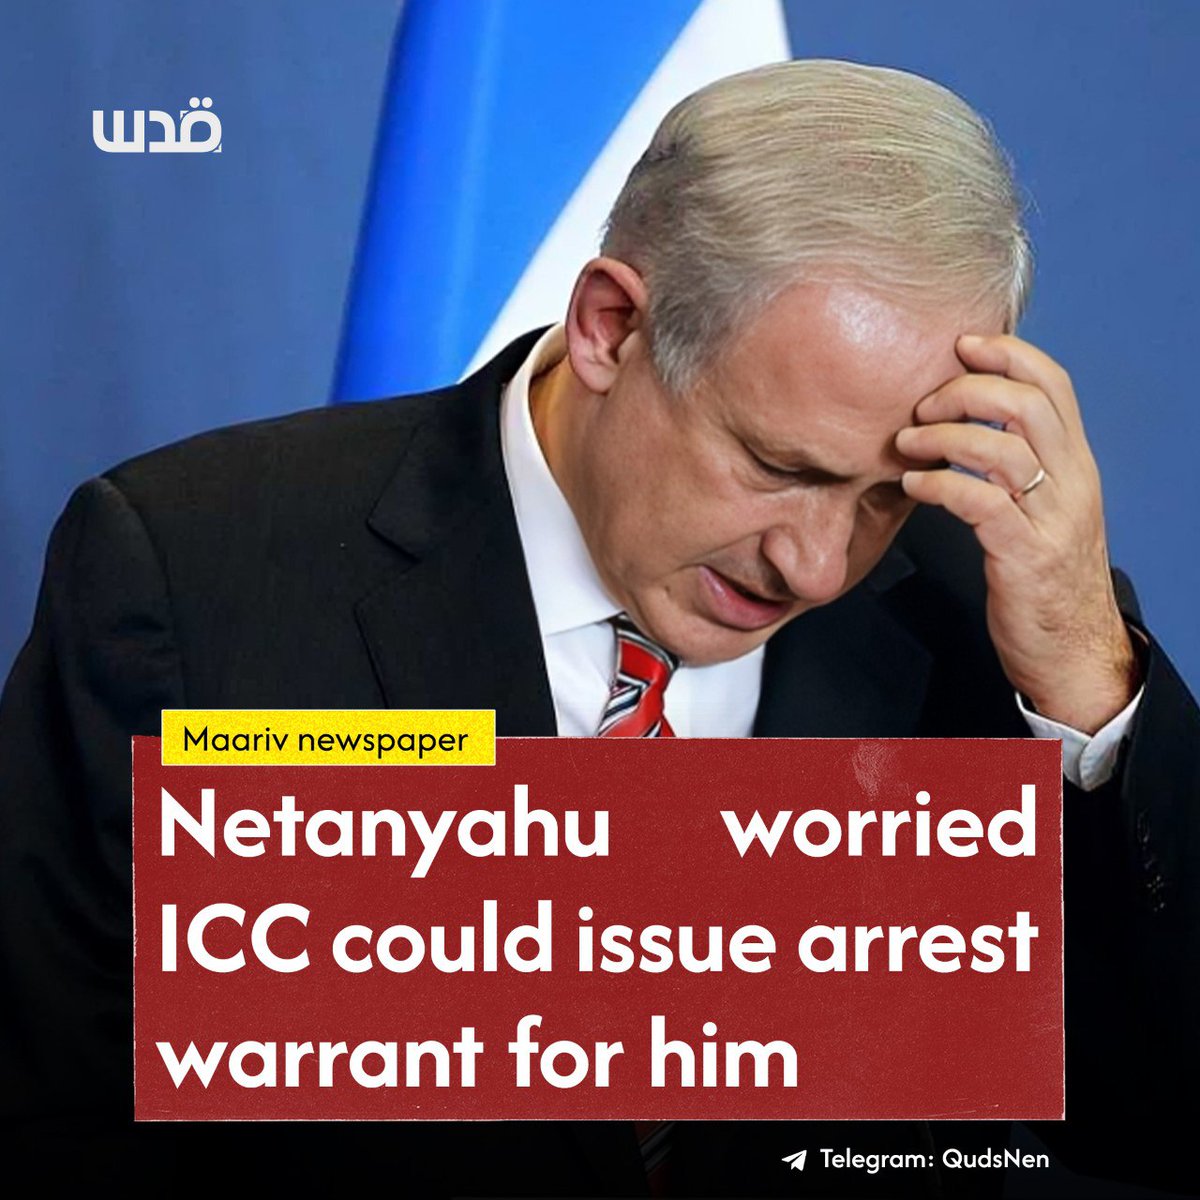 Arrest warrant would disgrace the genocidal warcriminal Netanyahu.
He has lost the war in Gaza & lost completely moral support from the world.
Alhamdulilah the mujahideen have shown great courage regardless how much Zionists & apostate Arab leaders hate it
#Gazagenocide #Israel